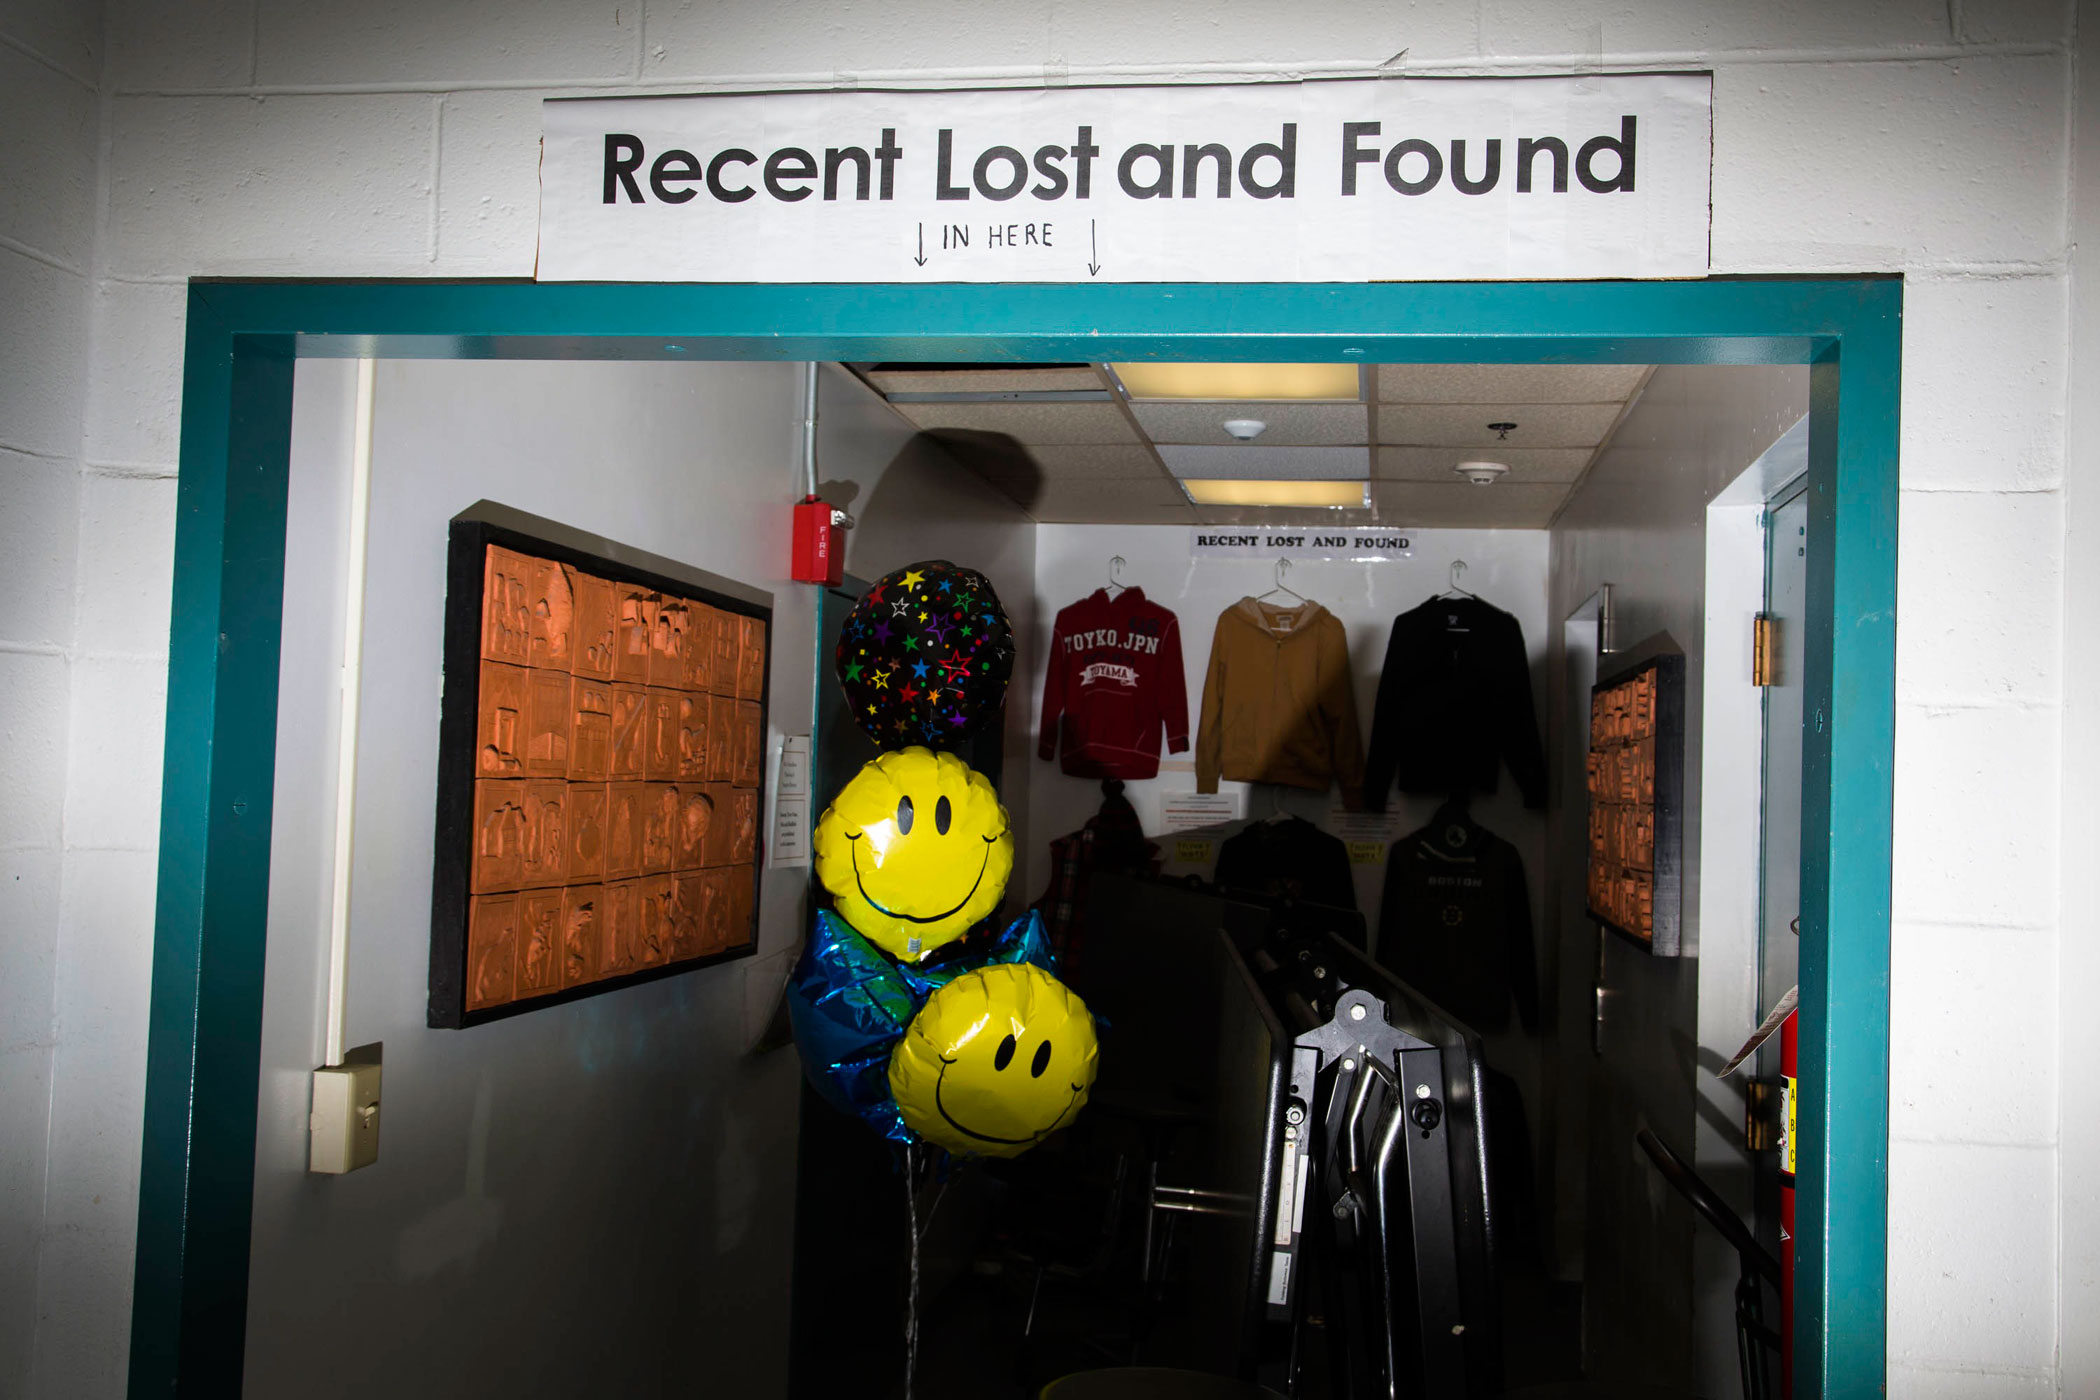 A lost and found at Hampton Academy, where Republican presidential candidate, New Jersey Gov. Chris Christie held a campaign event on Feb. 7, 2016, in Hampton, N.H.